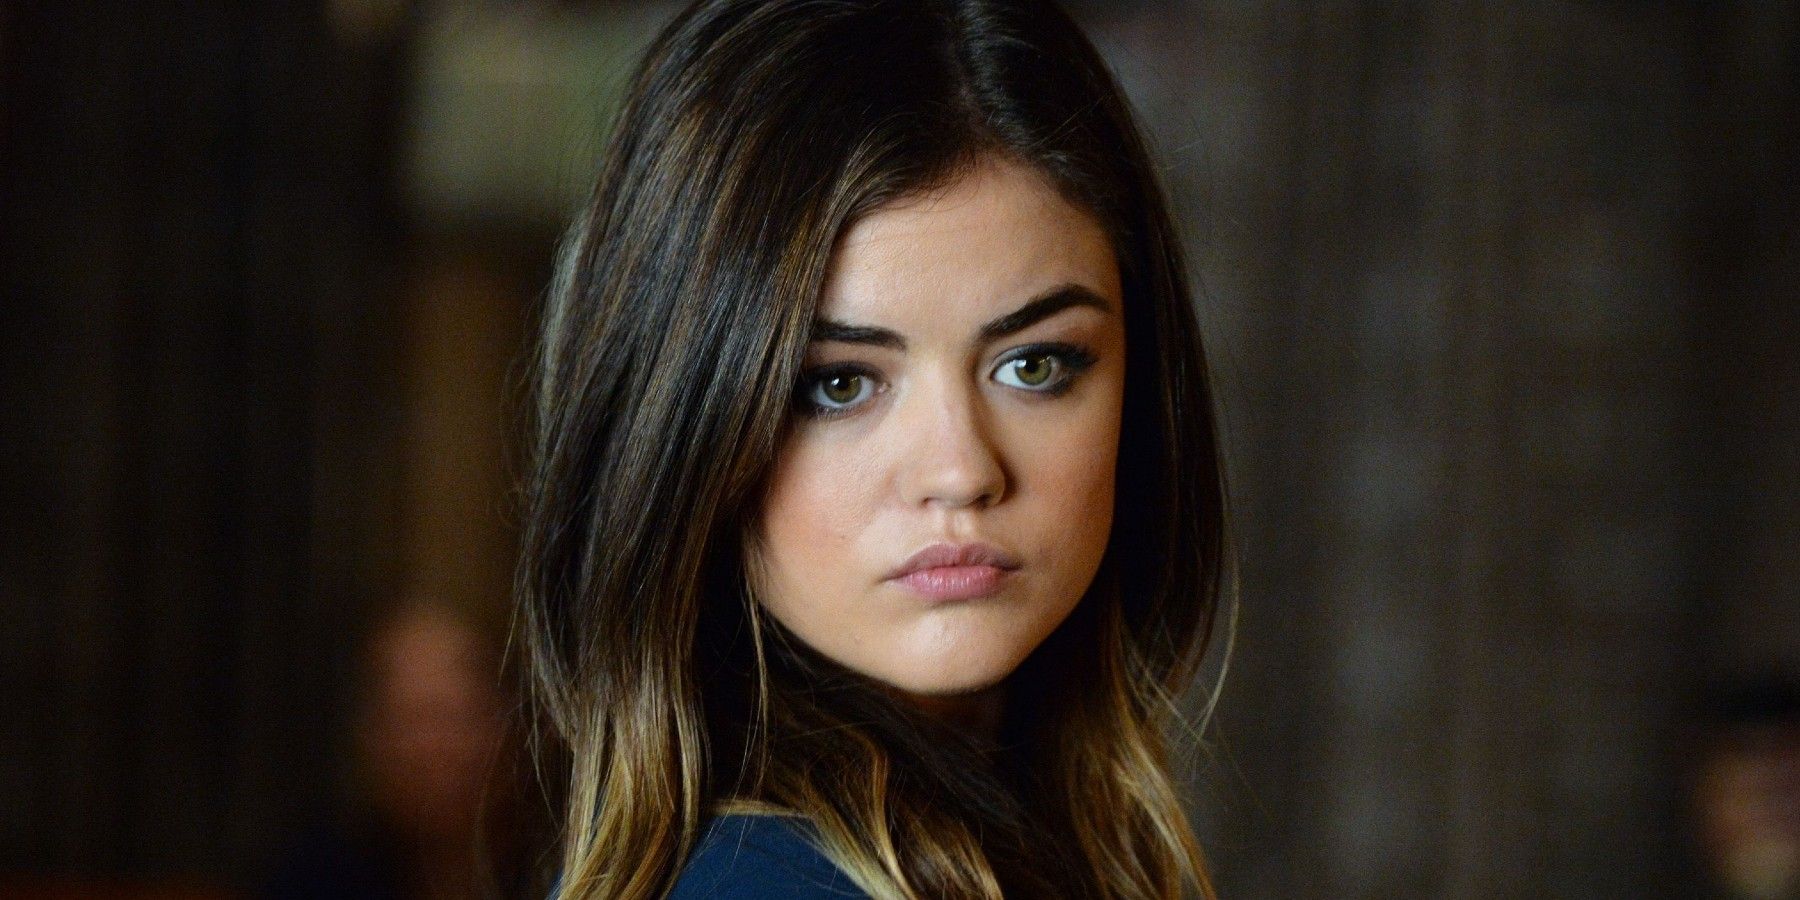 Pretty Little Liars Star Lucy Hale Fully Supports Cast of Reboot Show